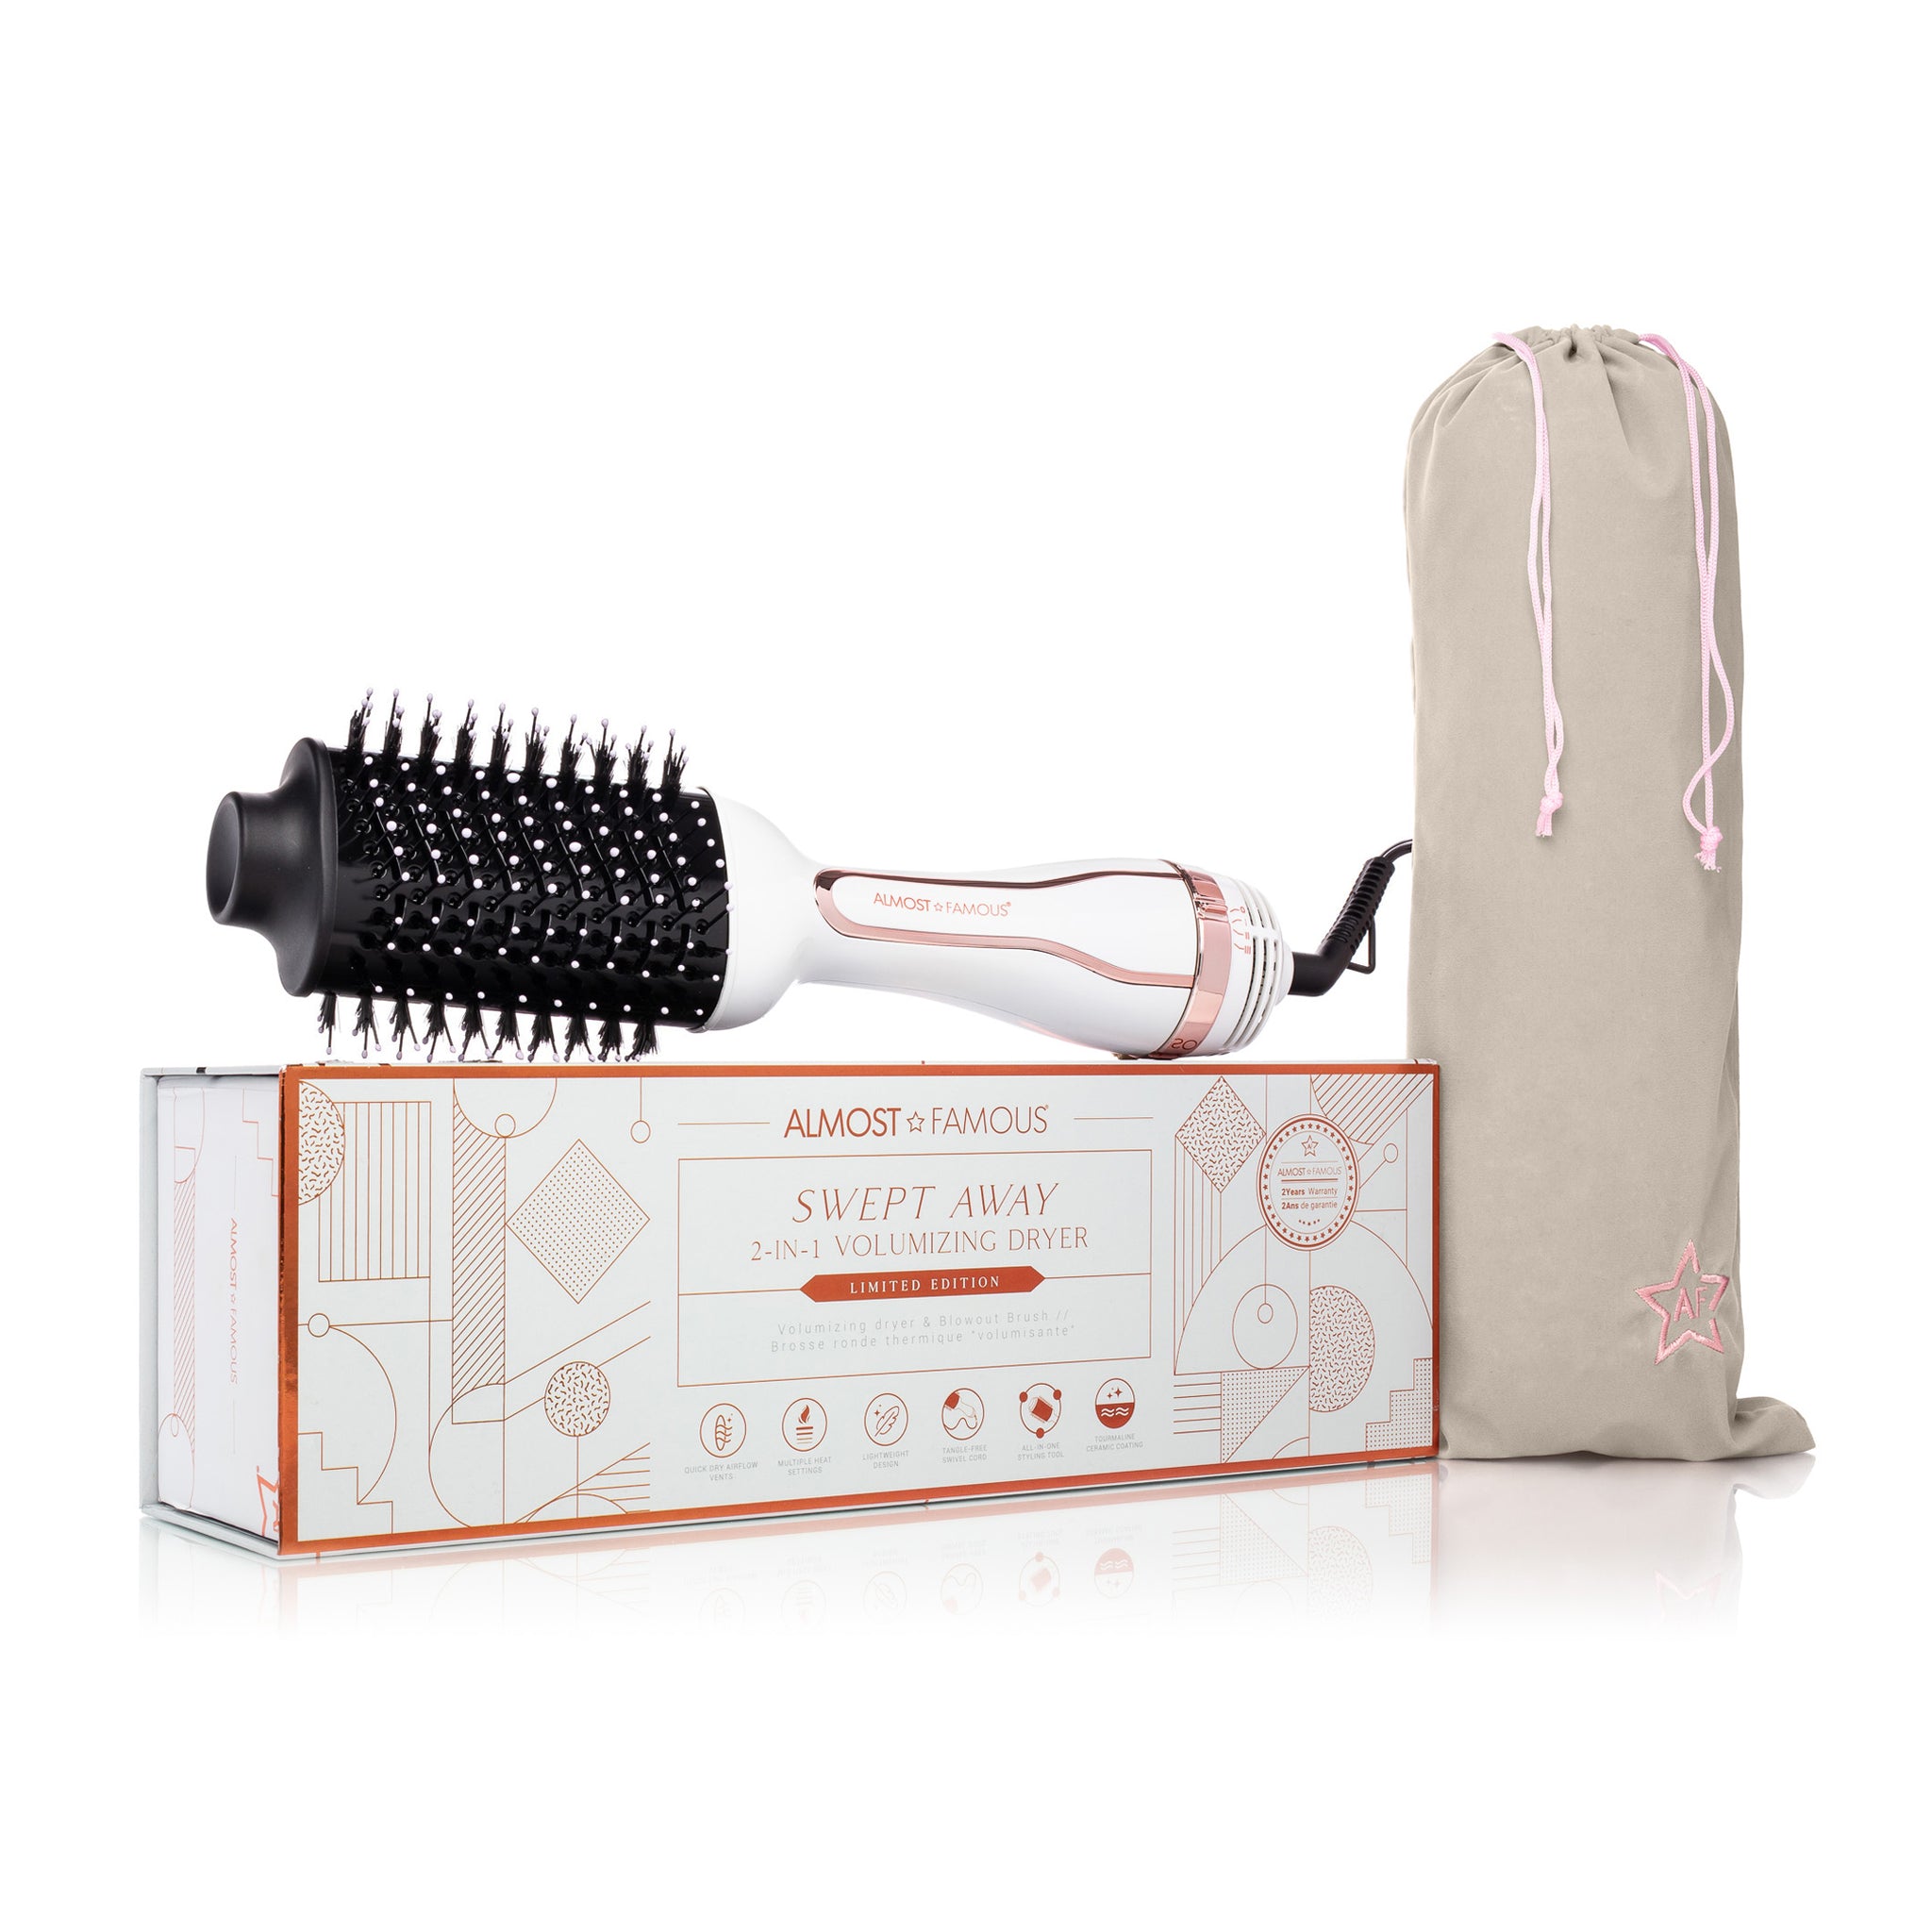 The Hot Tools Volumizer 2-in-1 Brush Dryer Review